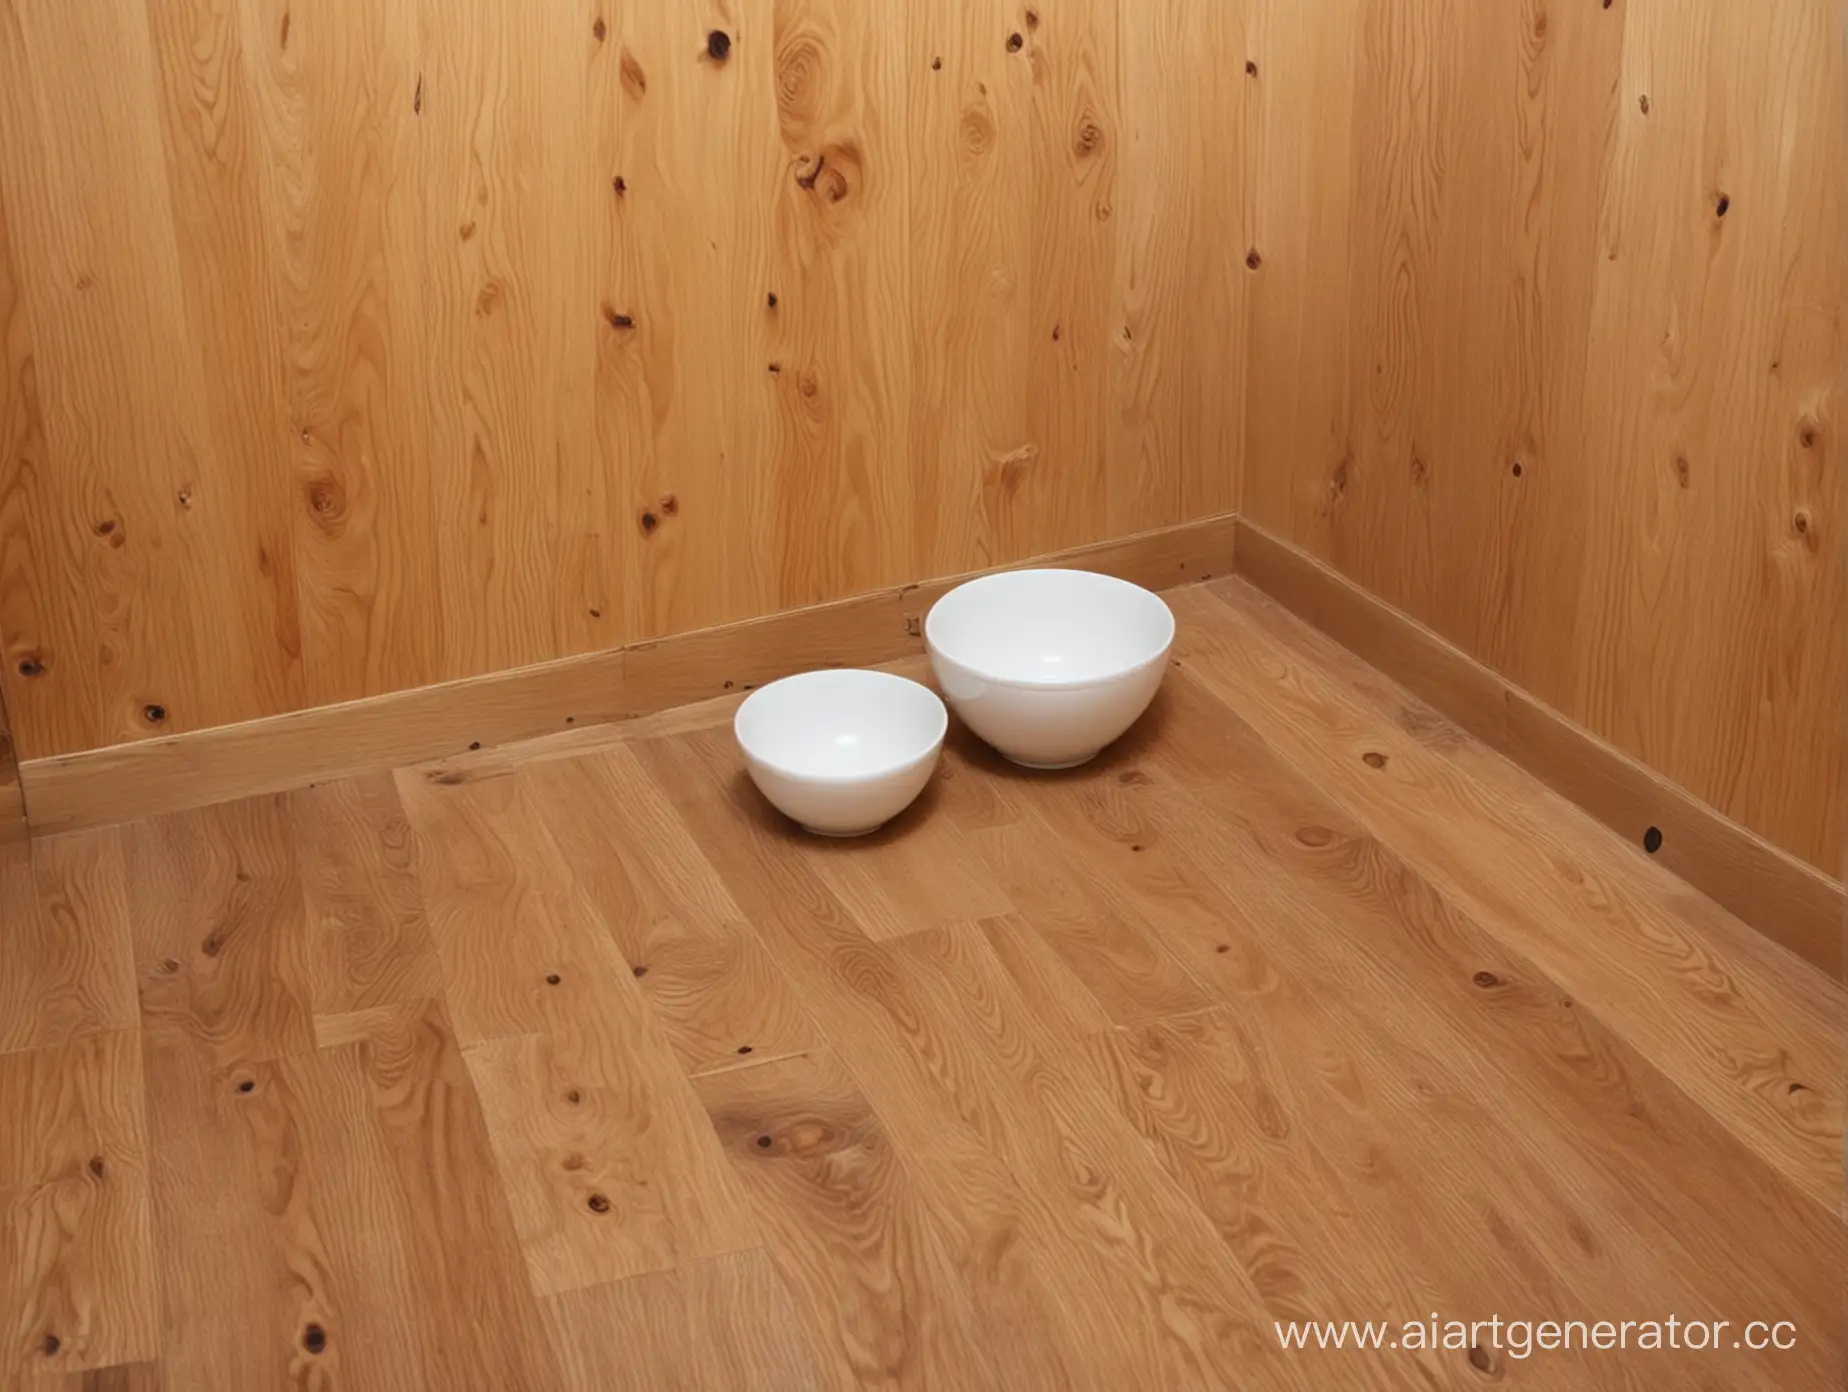 Minimalist-Wooden-Interior-with-Pets-Food-Bowl